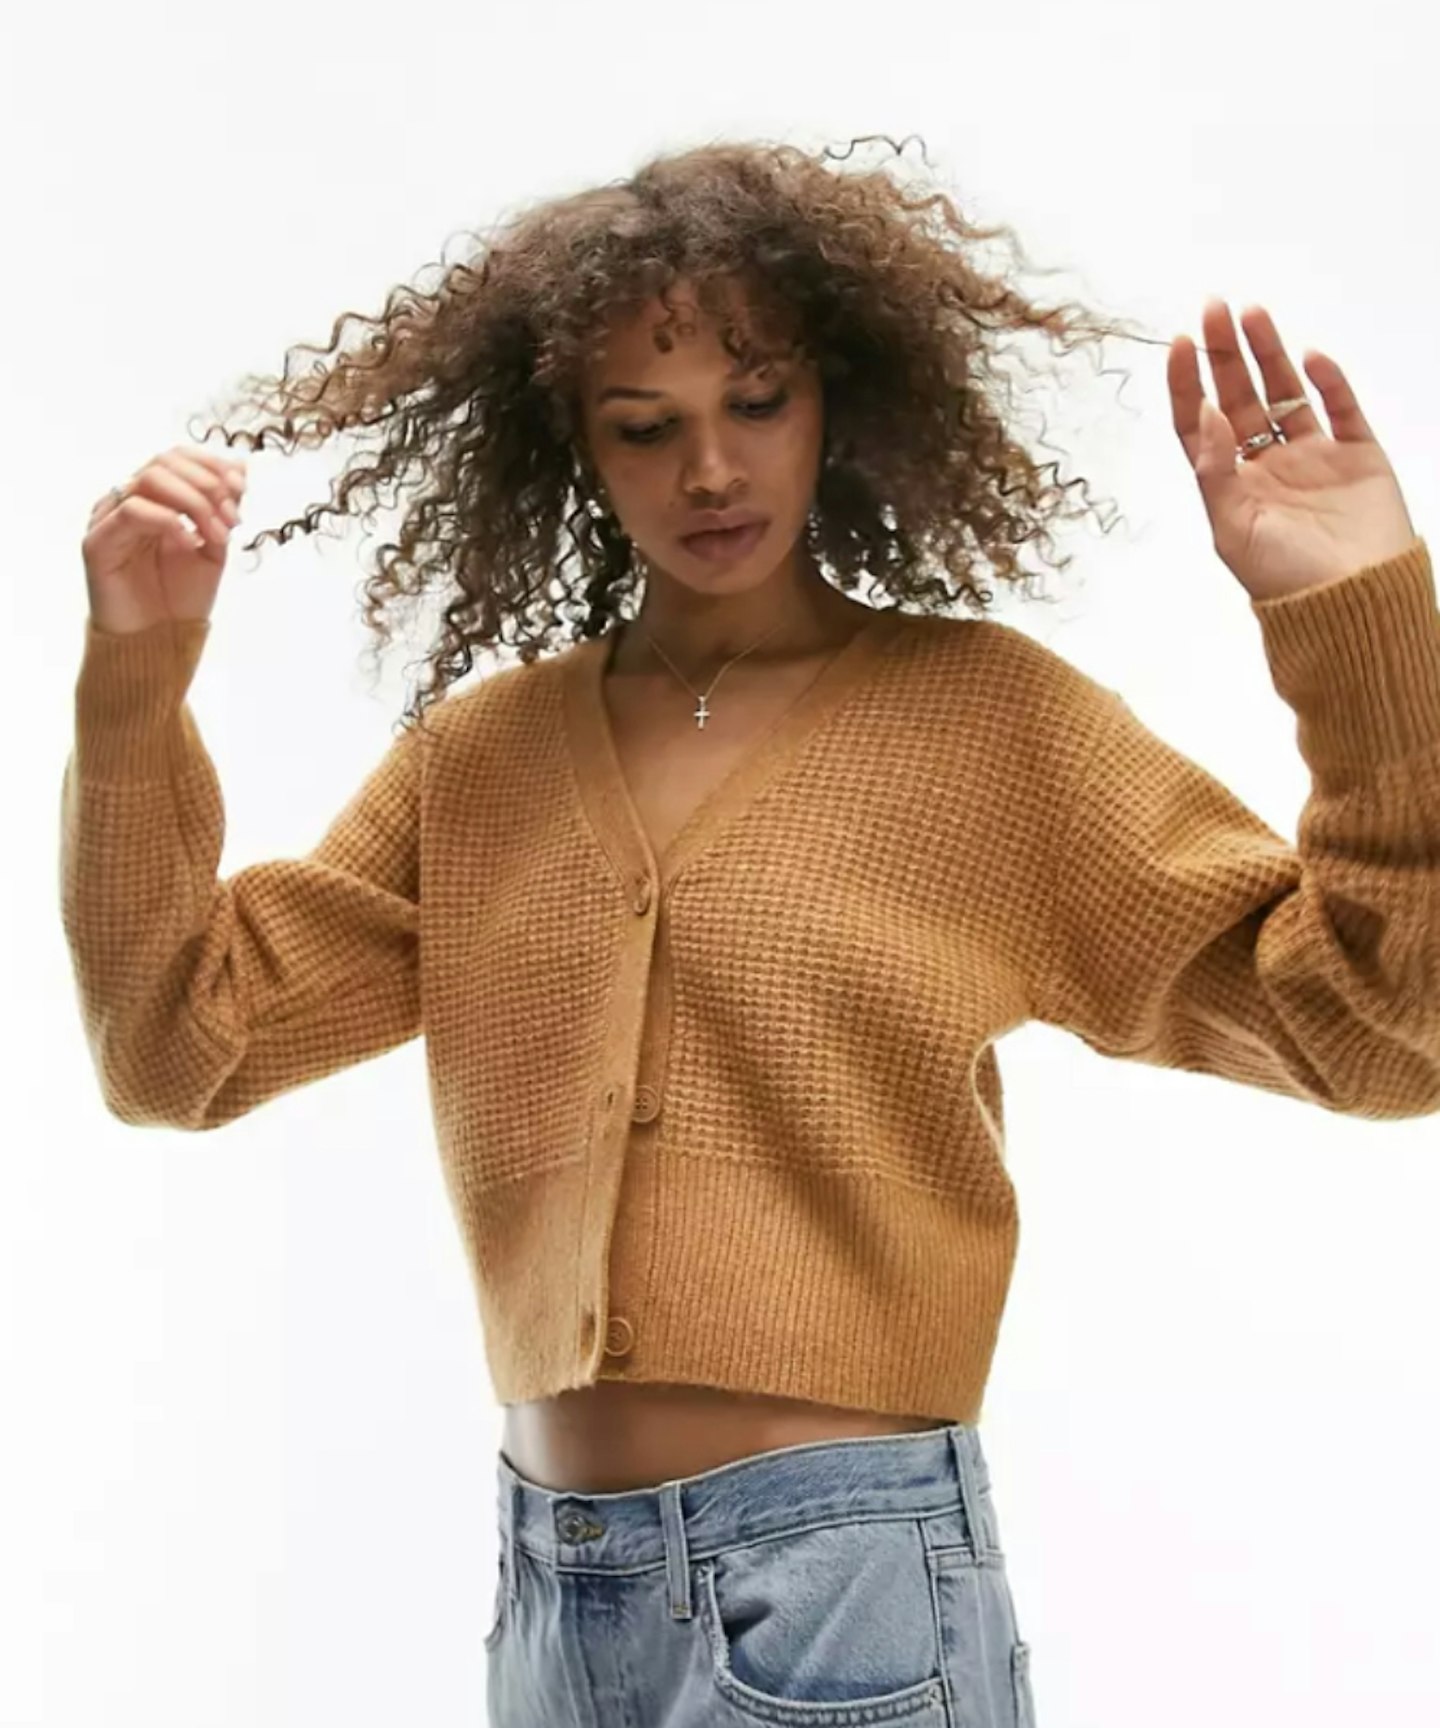 Topshop Tall Knitted Textured Crop Cardigan in Camel